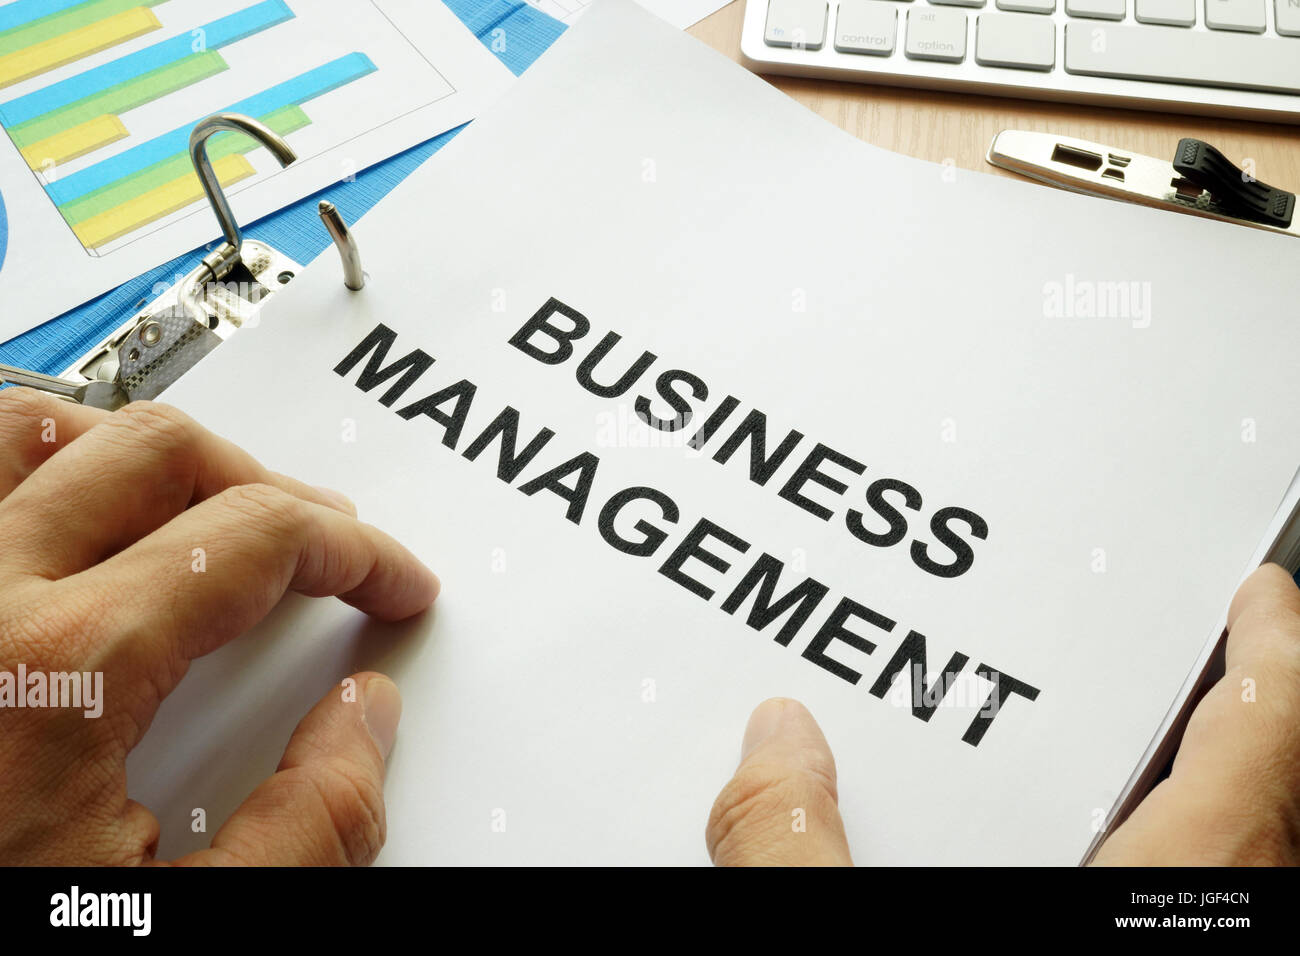 Folder and documents with title business management. Stock Photo